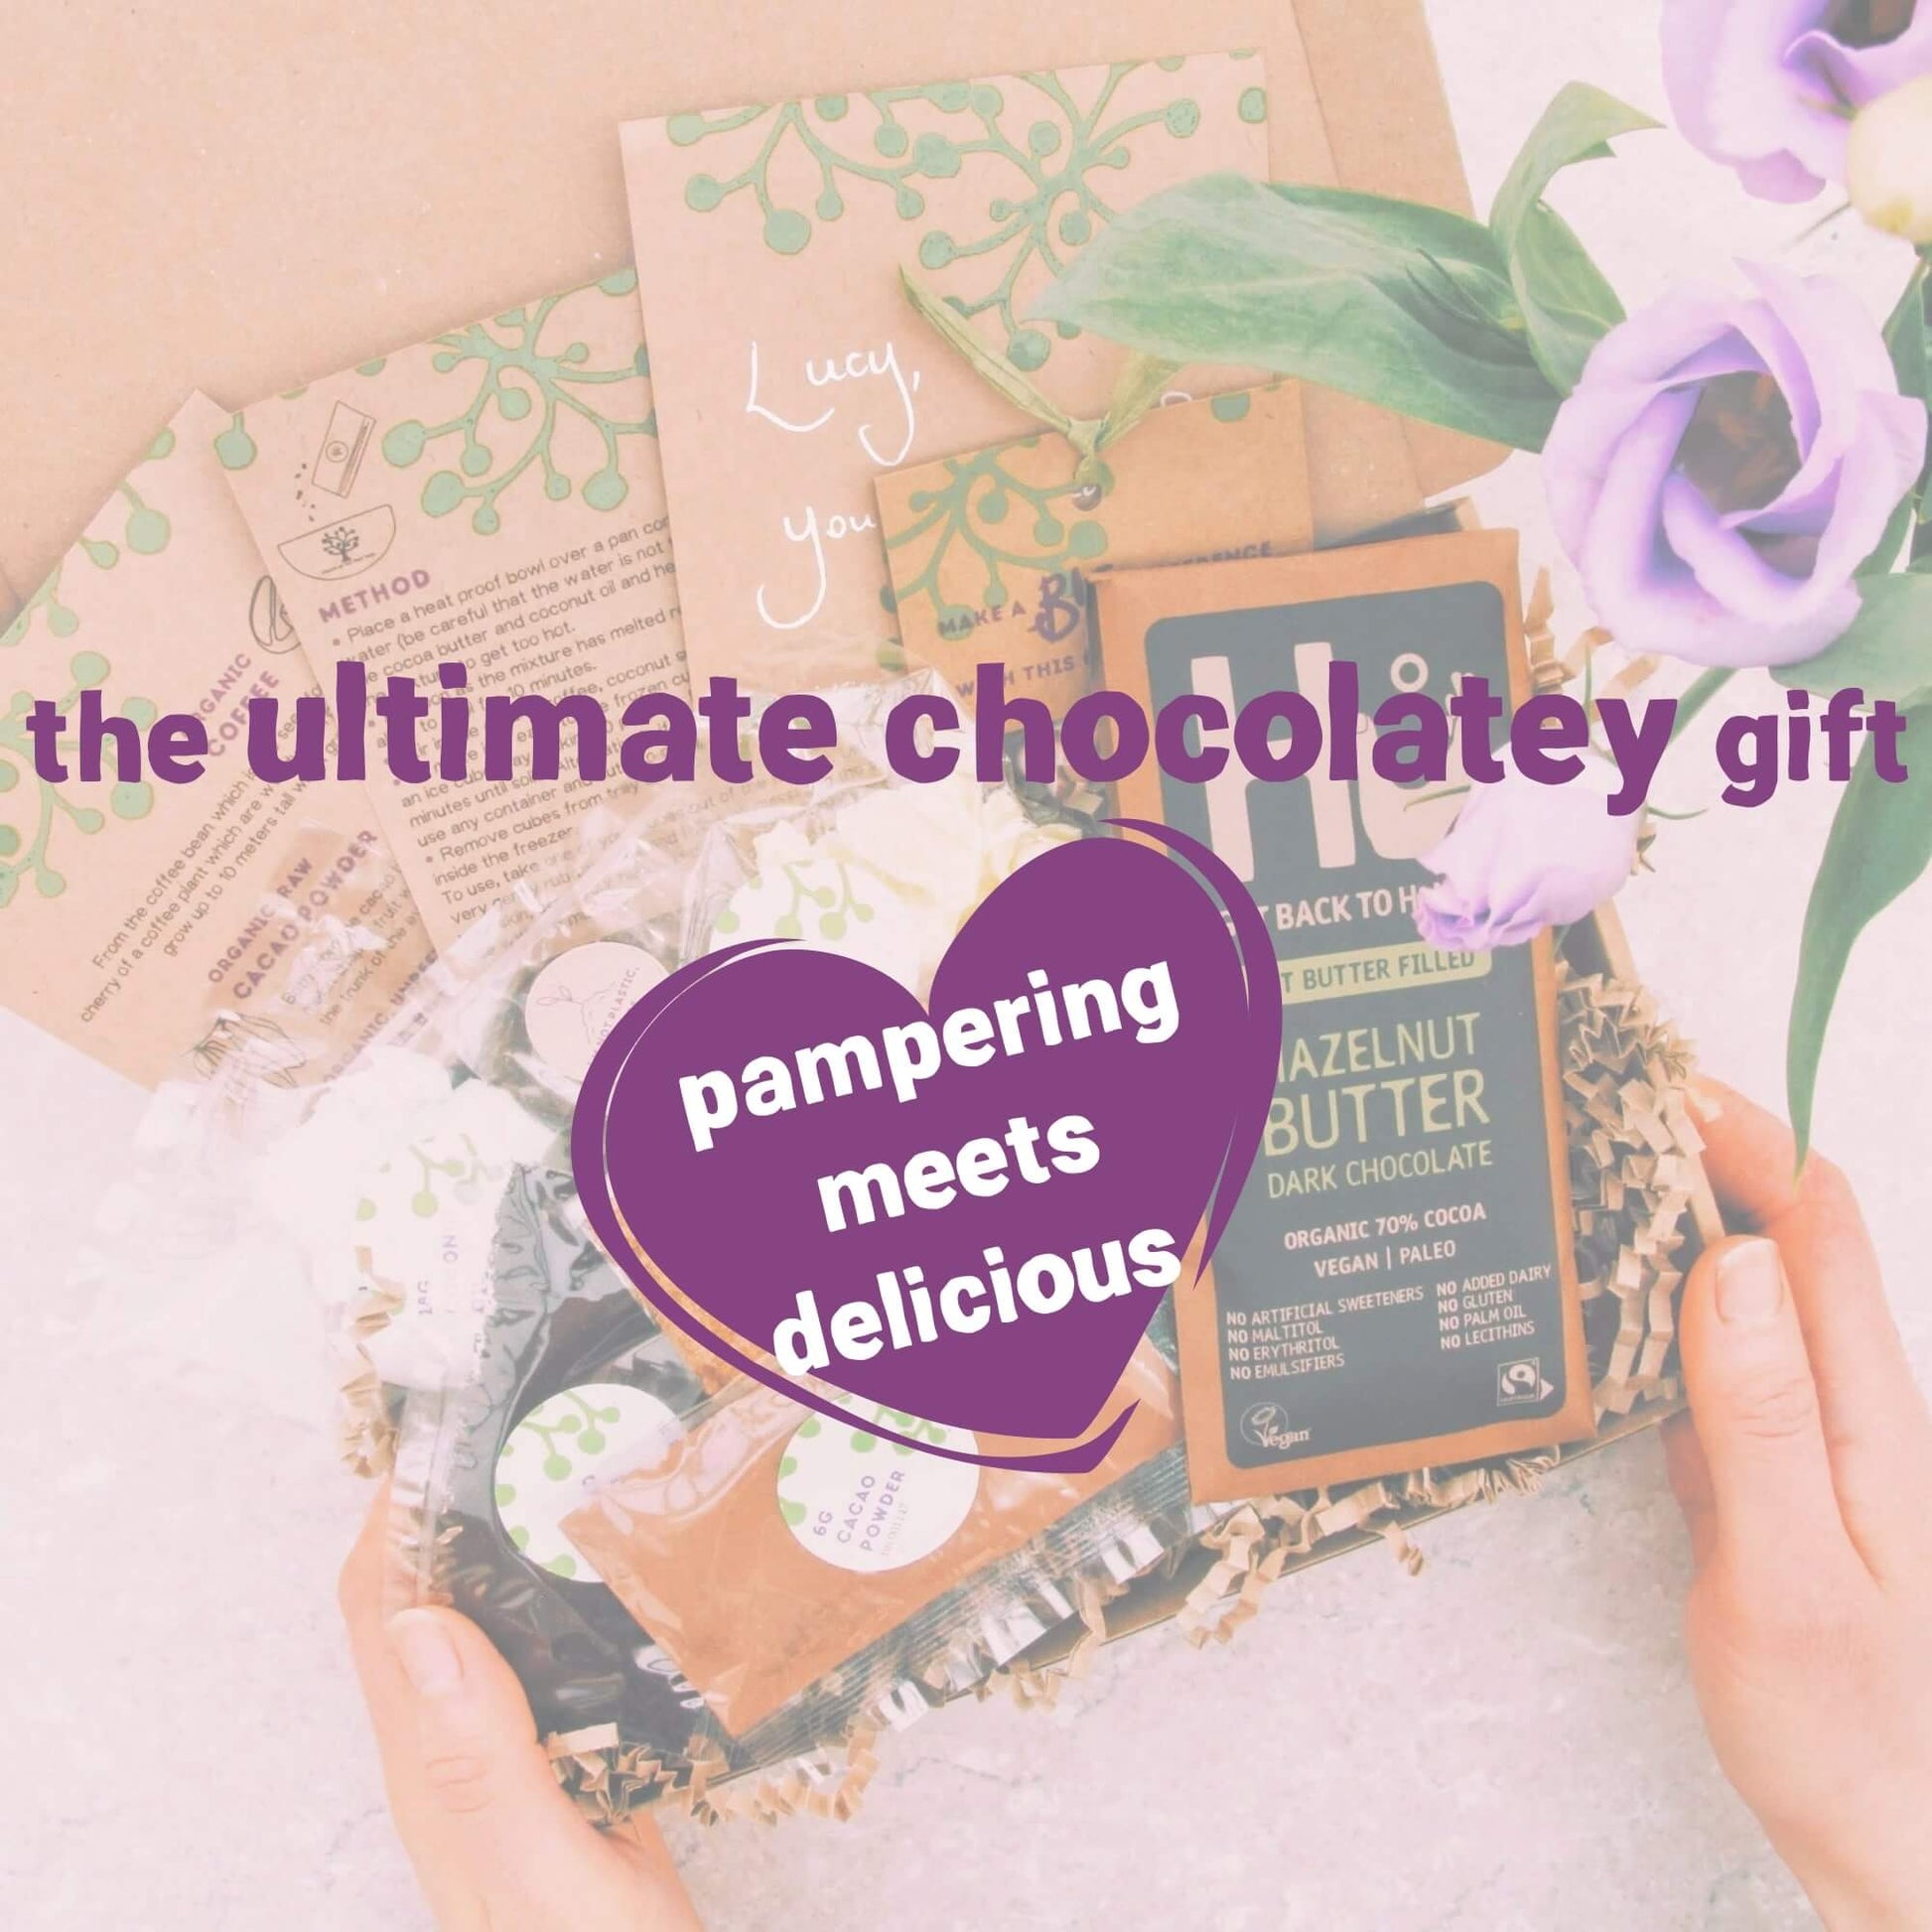 eco-friendly skincare kit and vegan chocolate inside gift for mum letterbox box